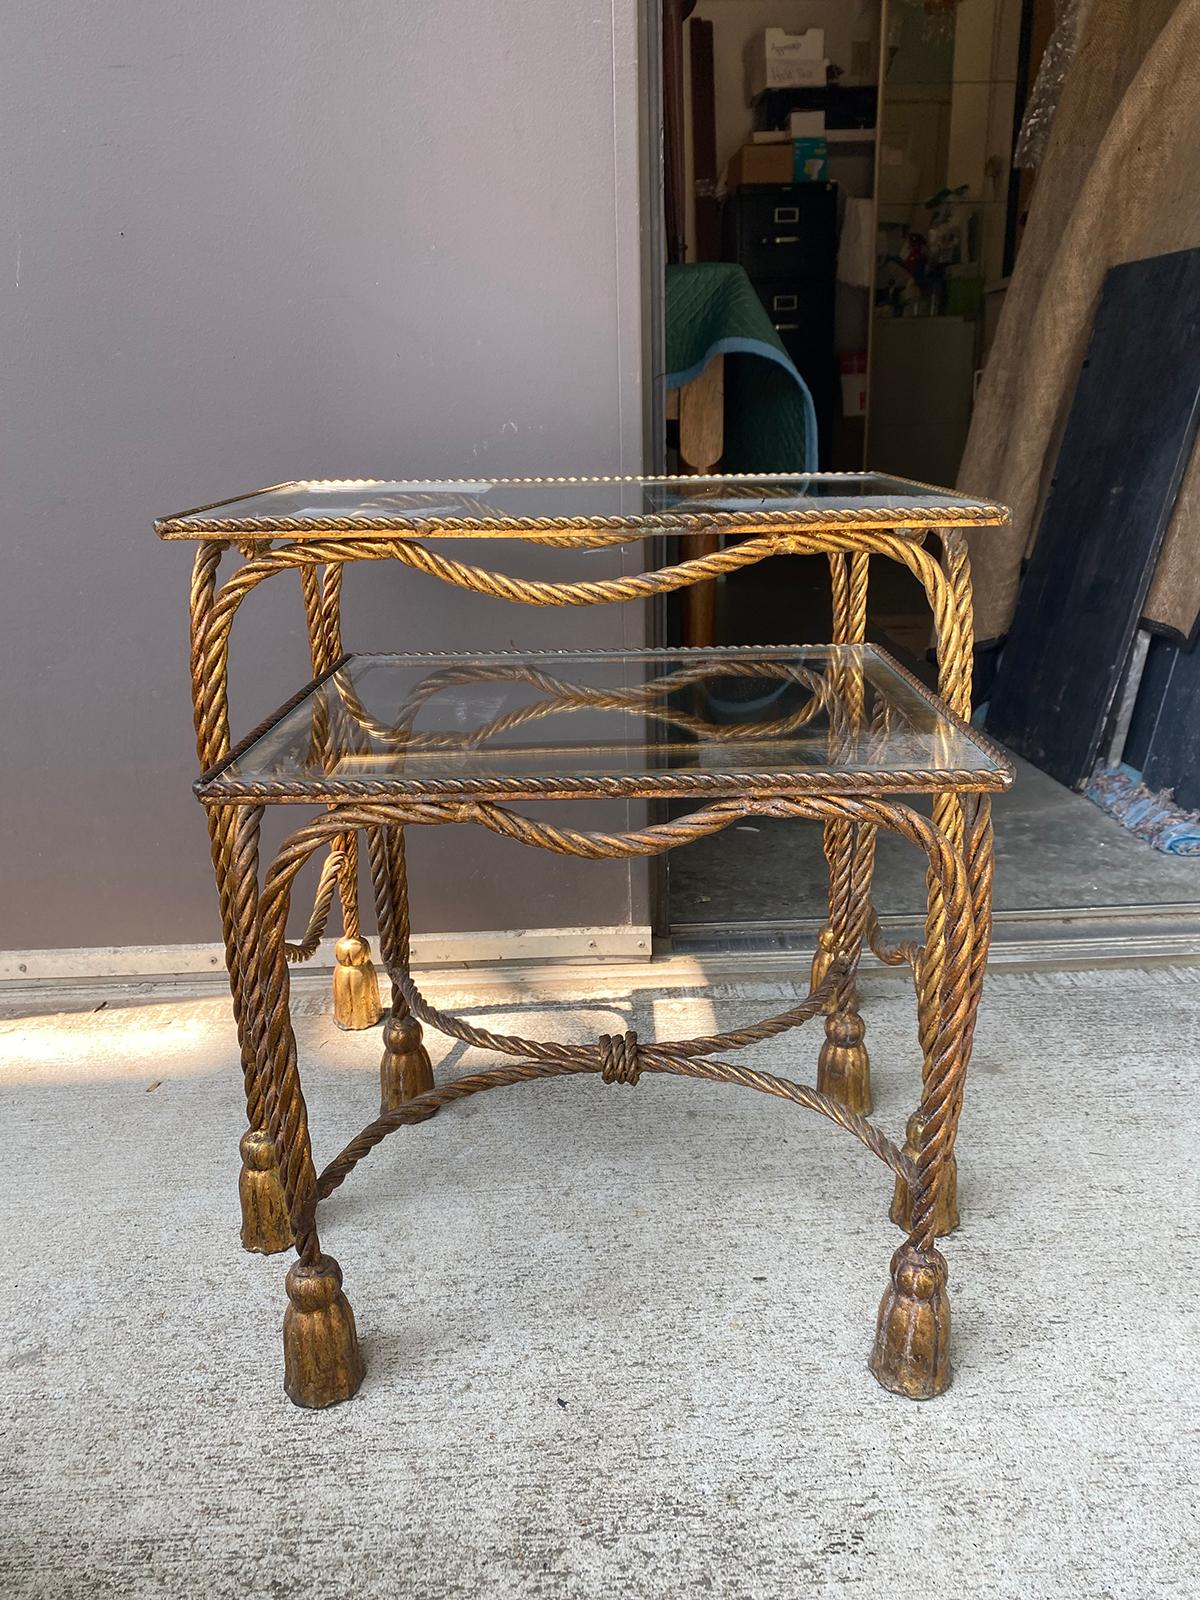 Mid-20th century Italian nesting tables with rope and tassel detail
Measures: Small: 17